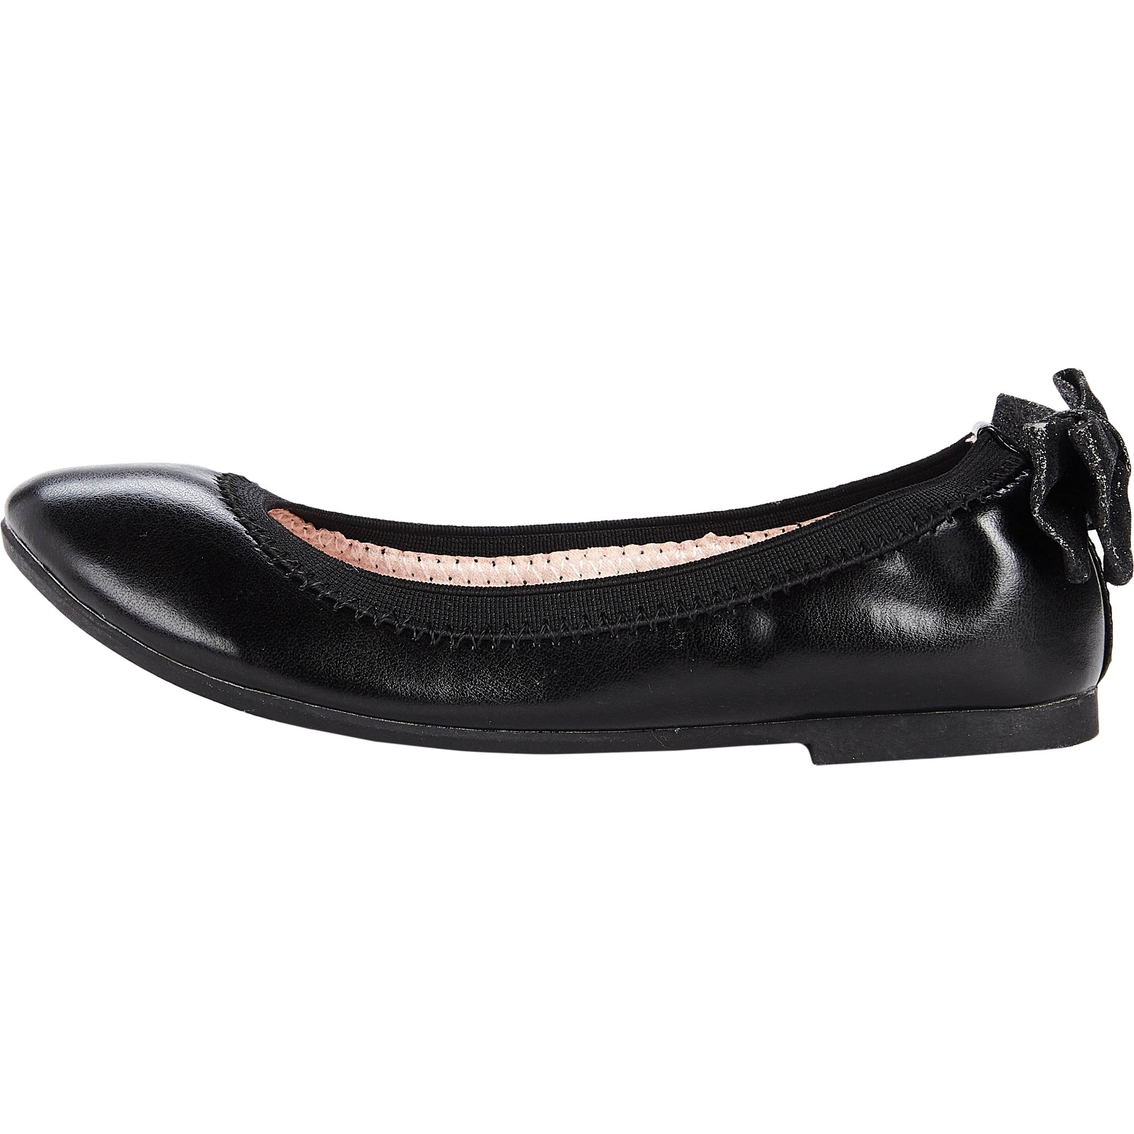 L.A. Underground Preschool Girls Classic Ballerina Flat Shoes with Back Bow - Image 2 of 4